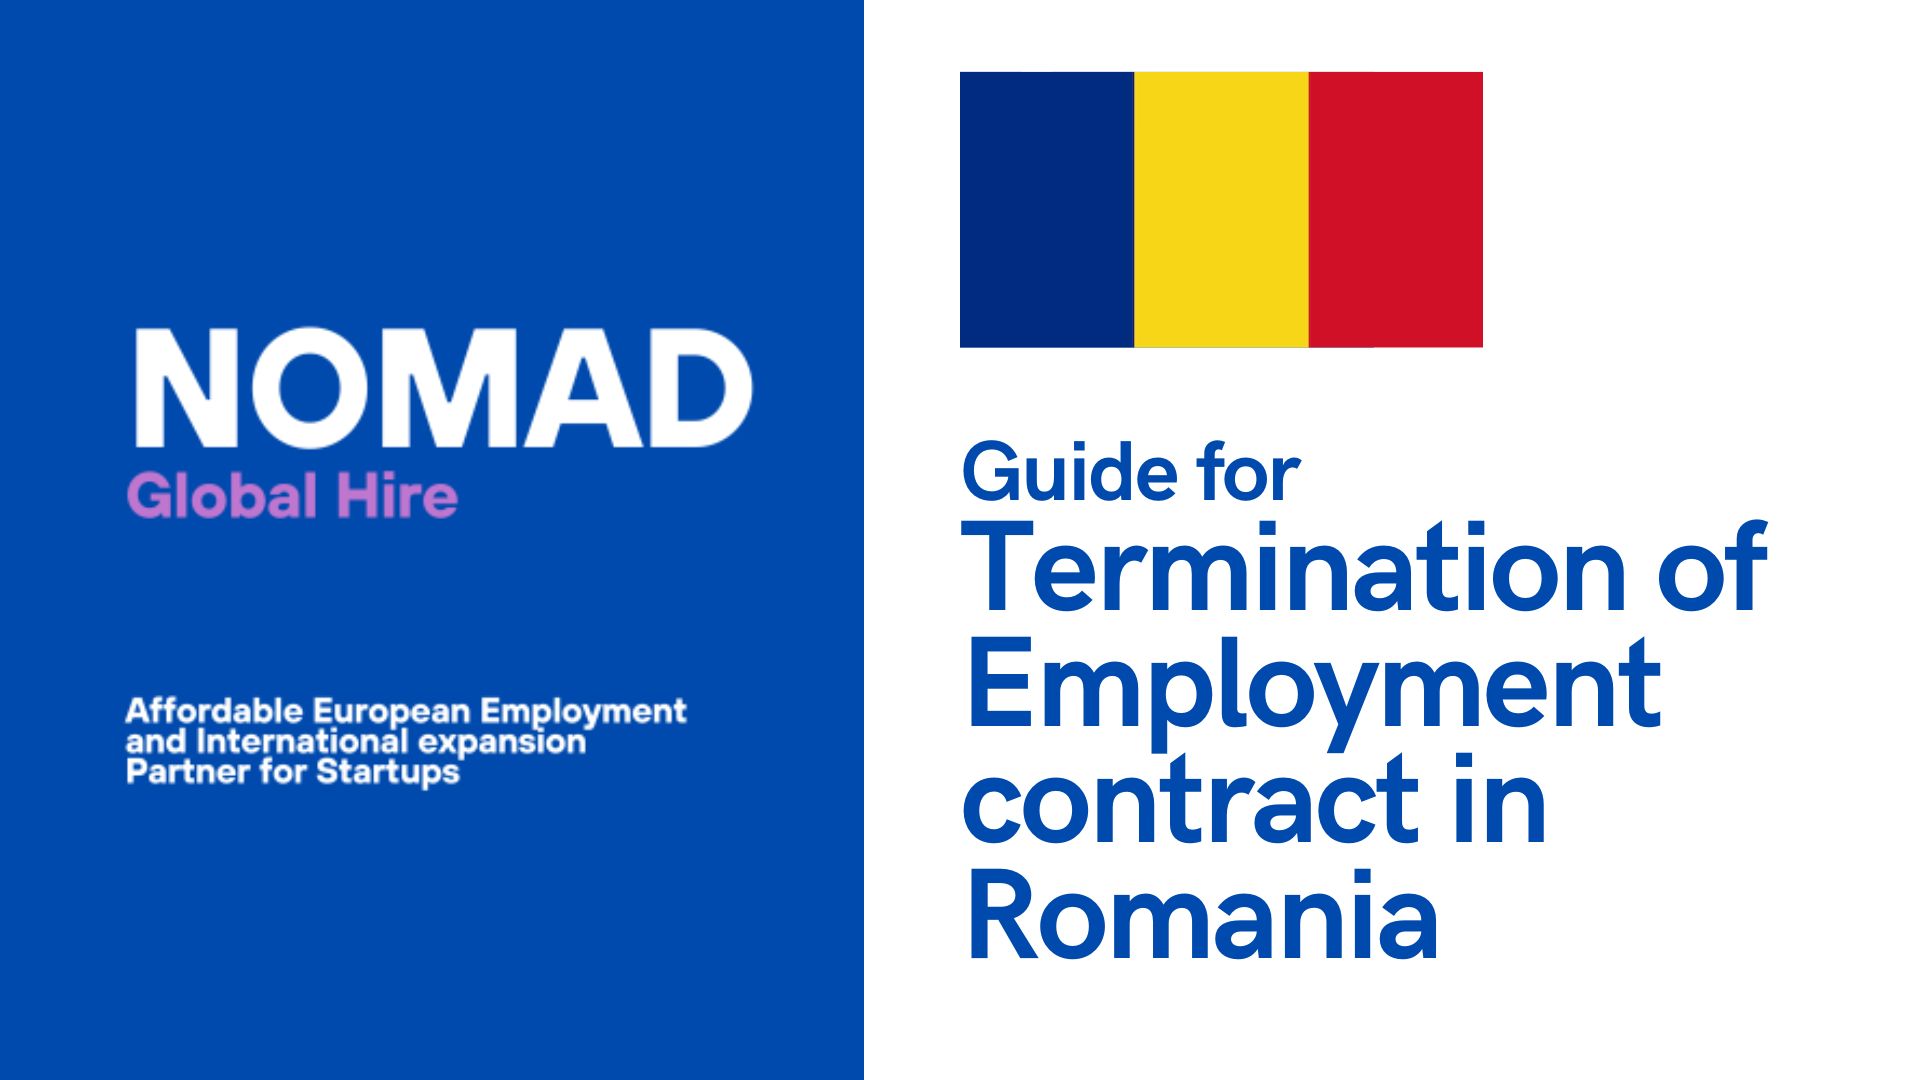 How to terminate an employment contract in Romania?